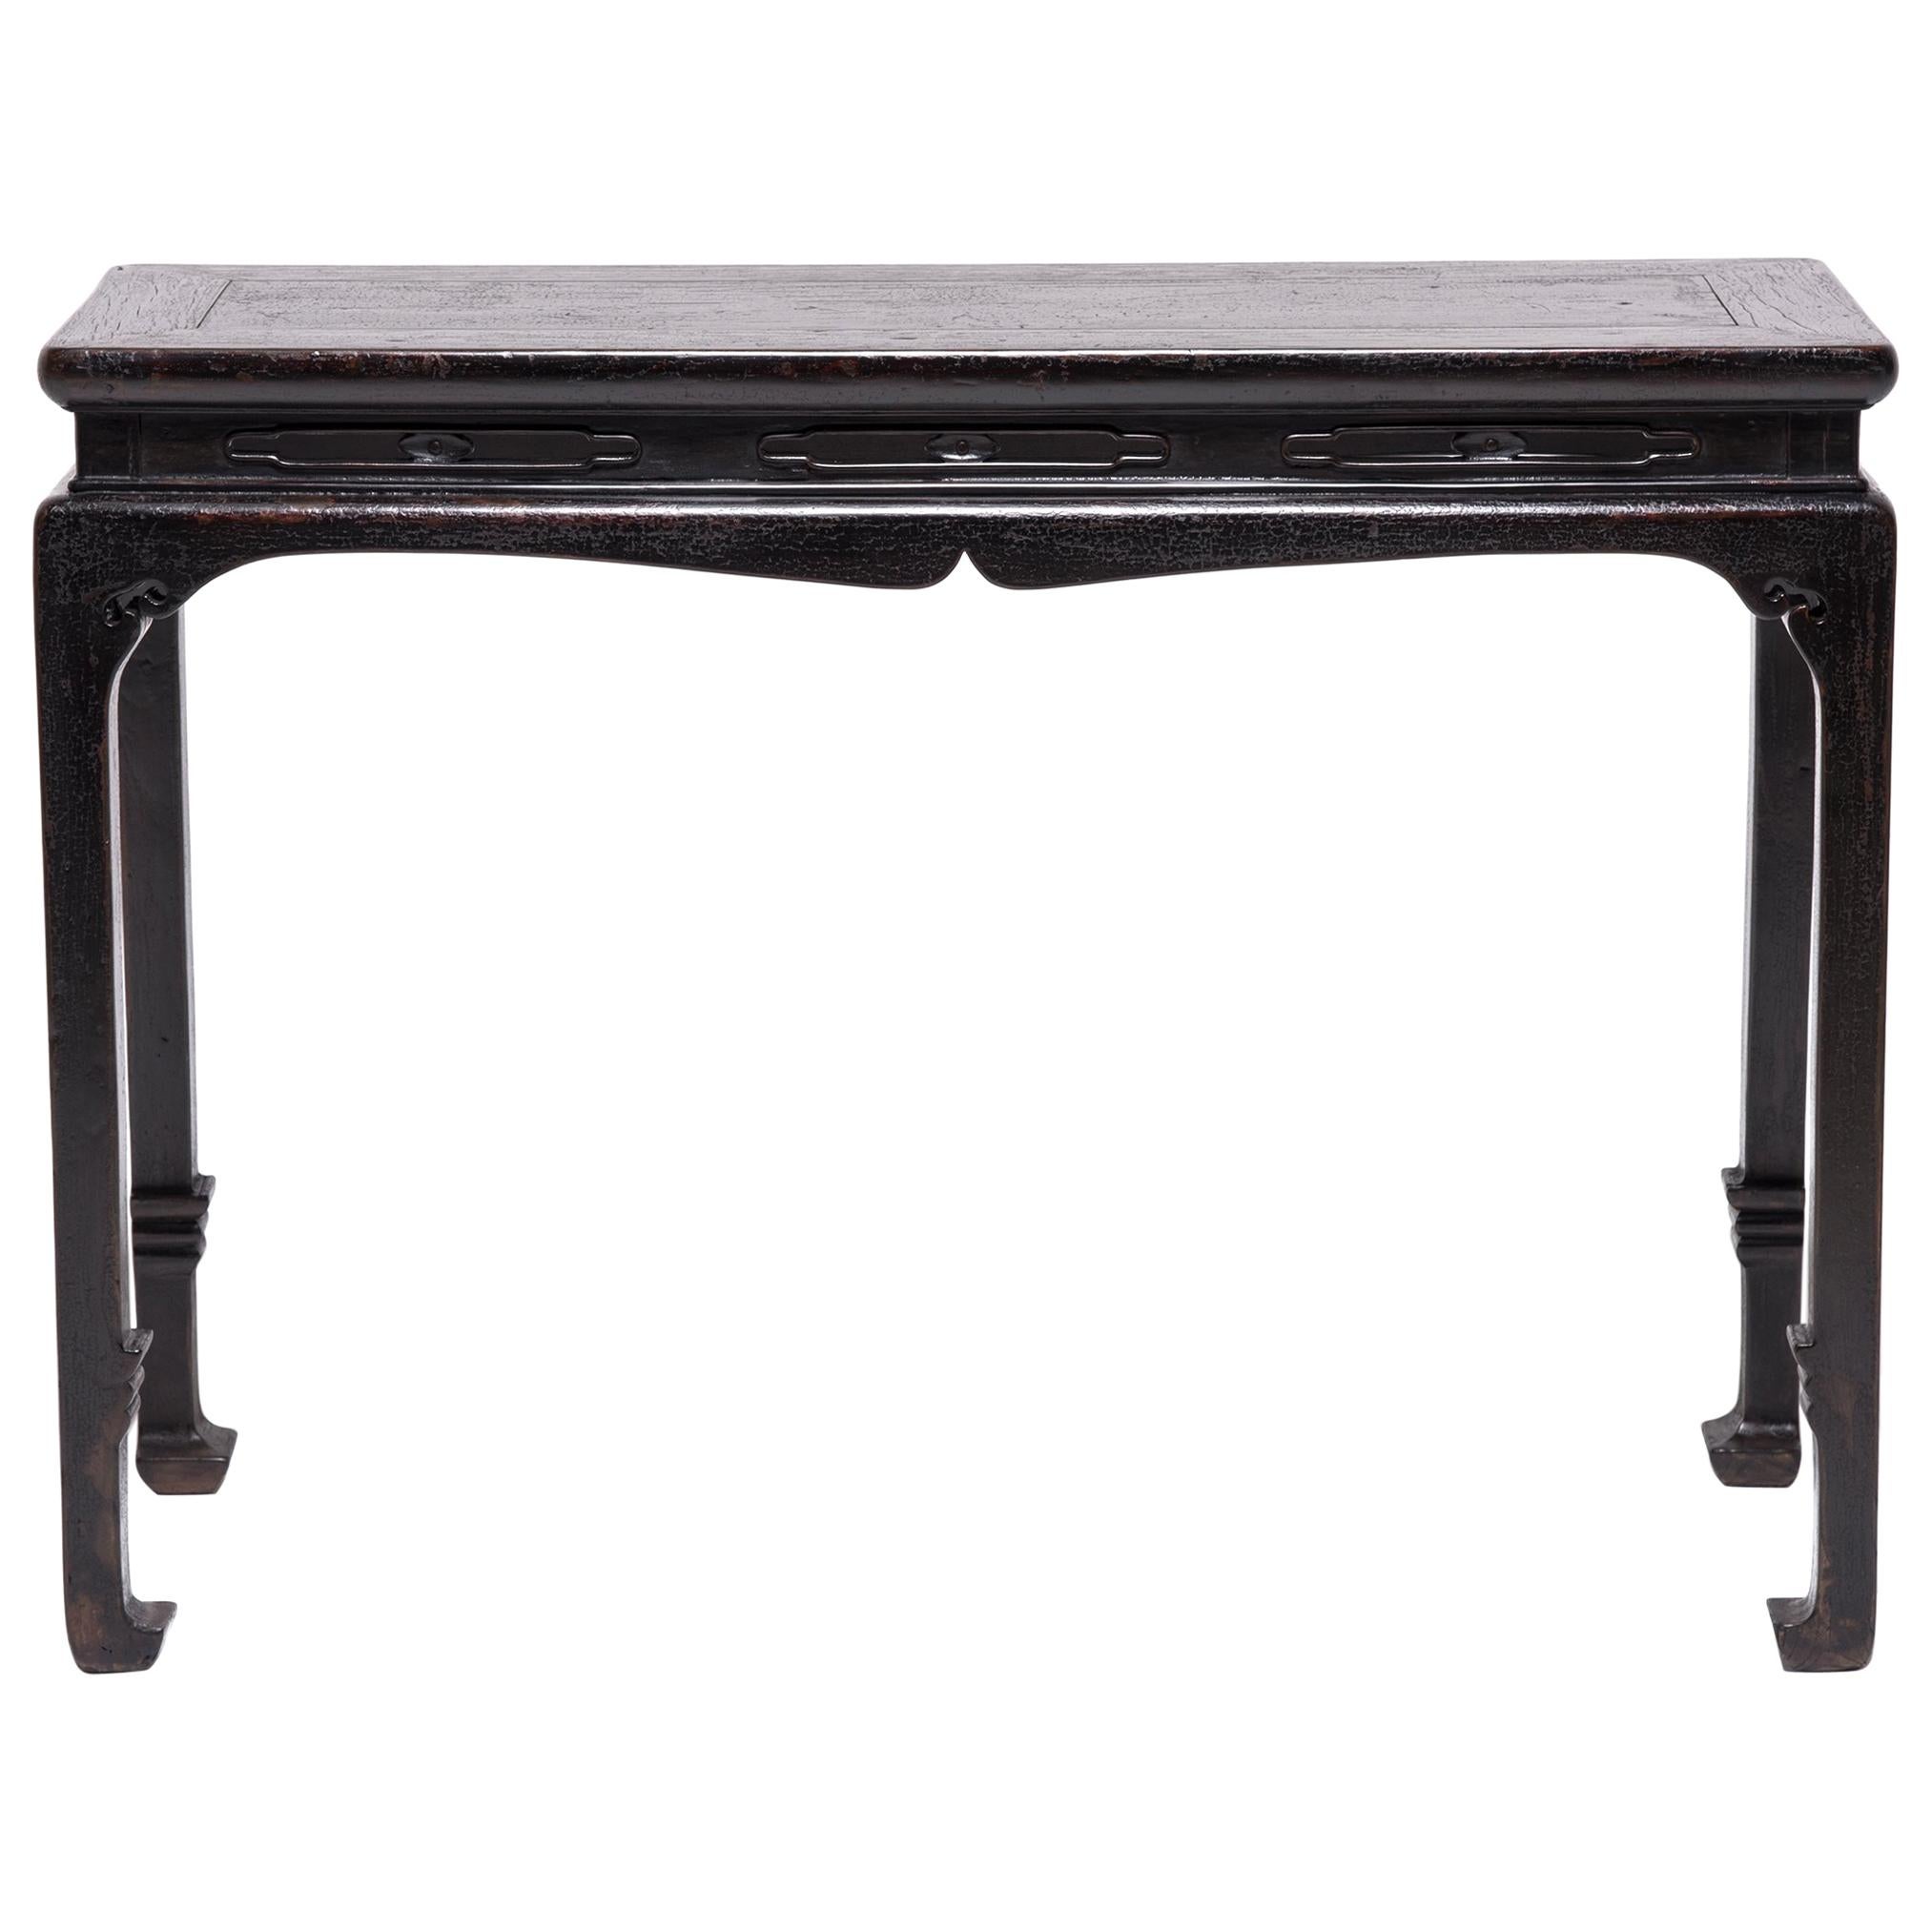 Chinese Console Table with Cusped Apron